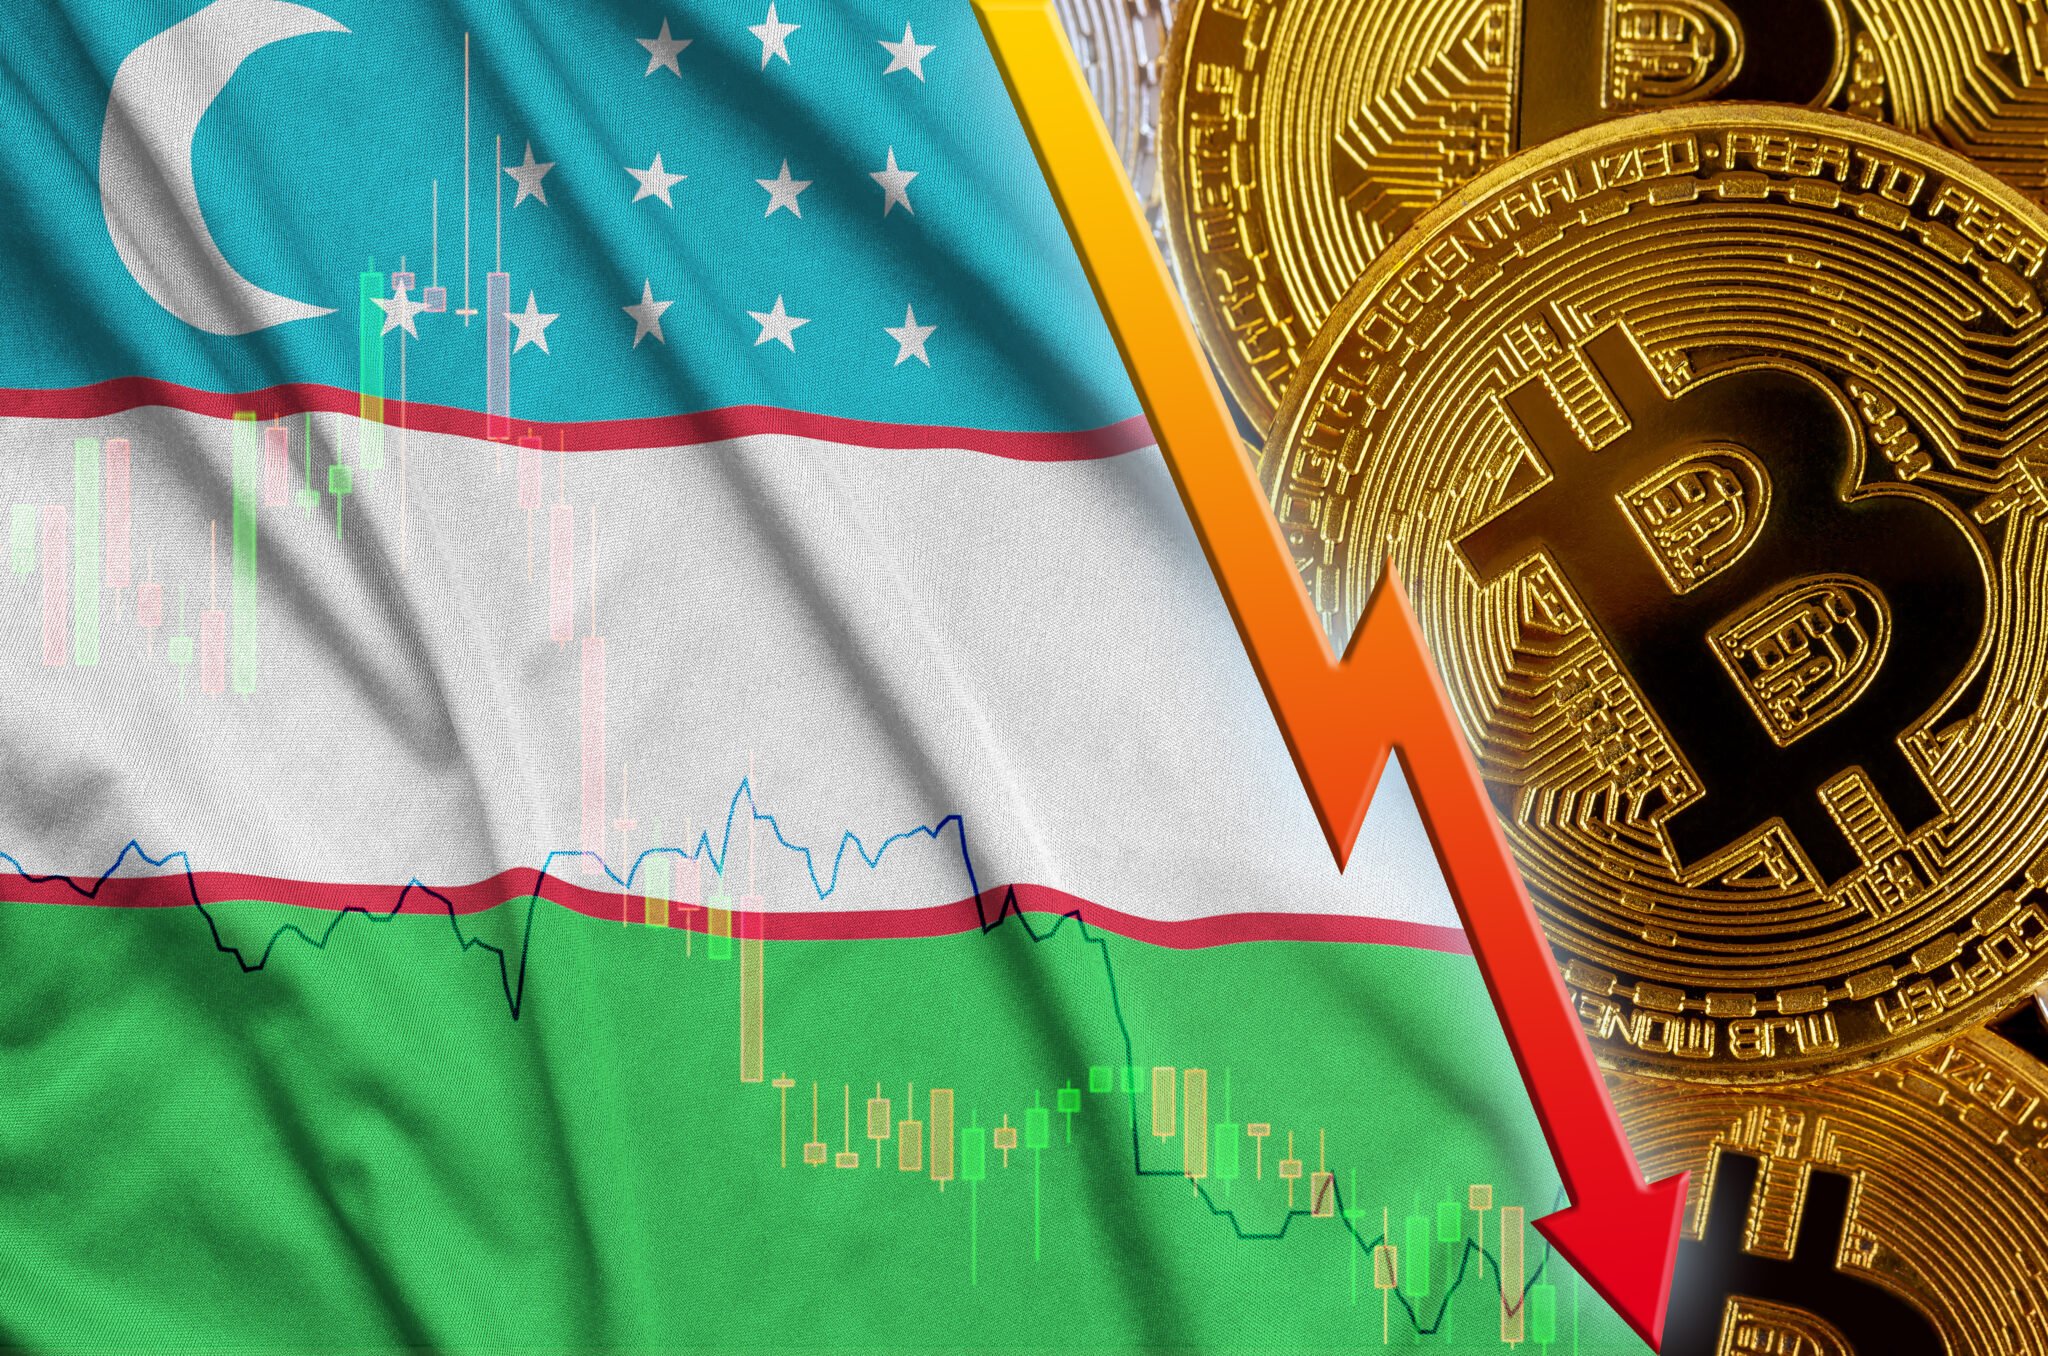 Uzbekistan flag and cryptocurrency falling trend with many golden bitcoins